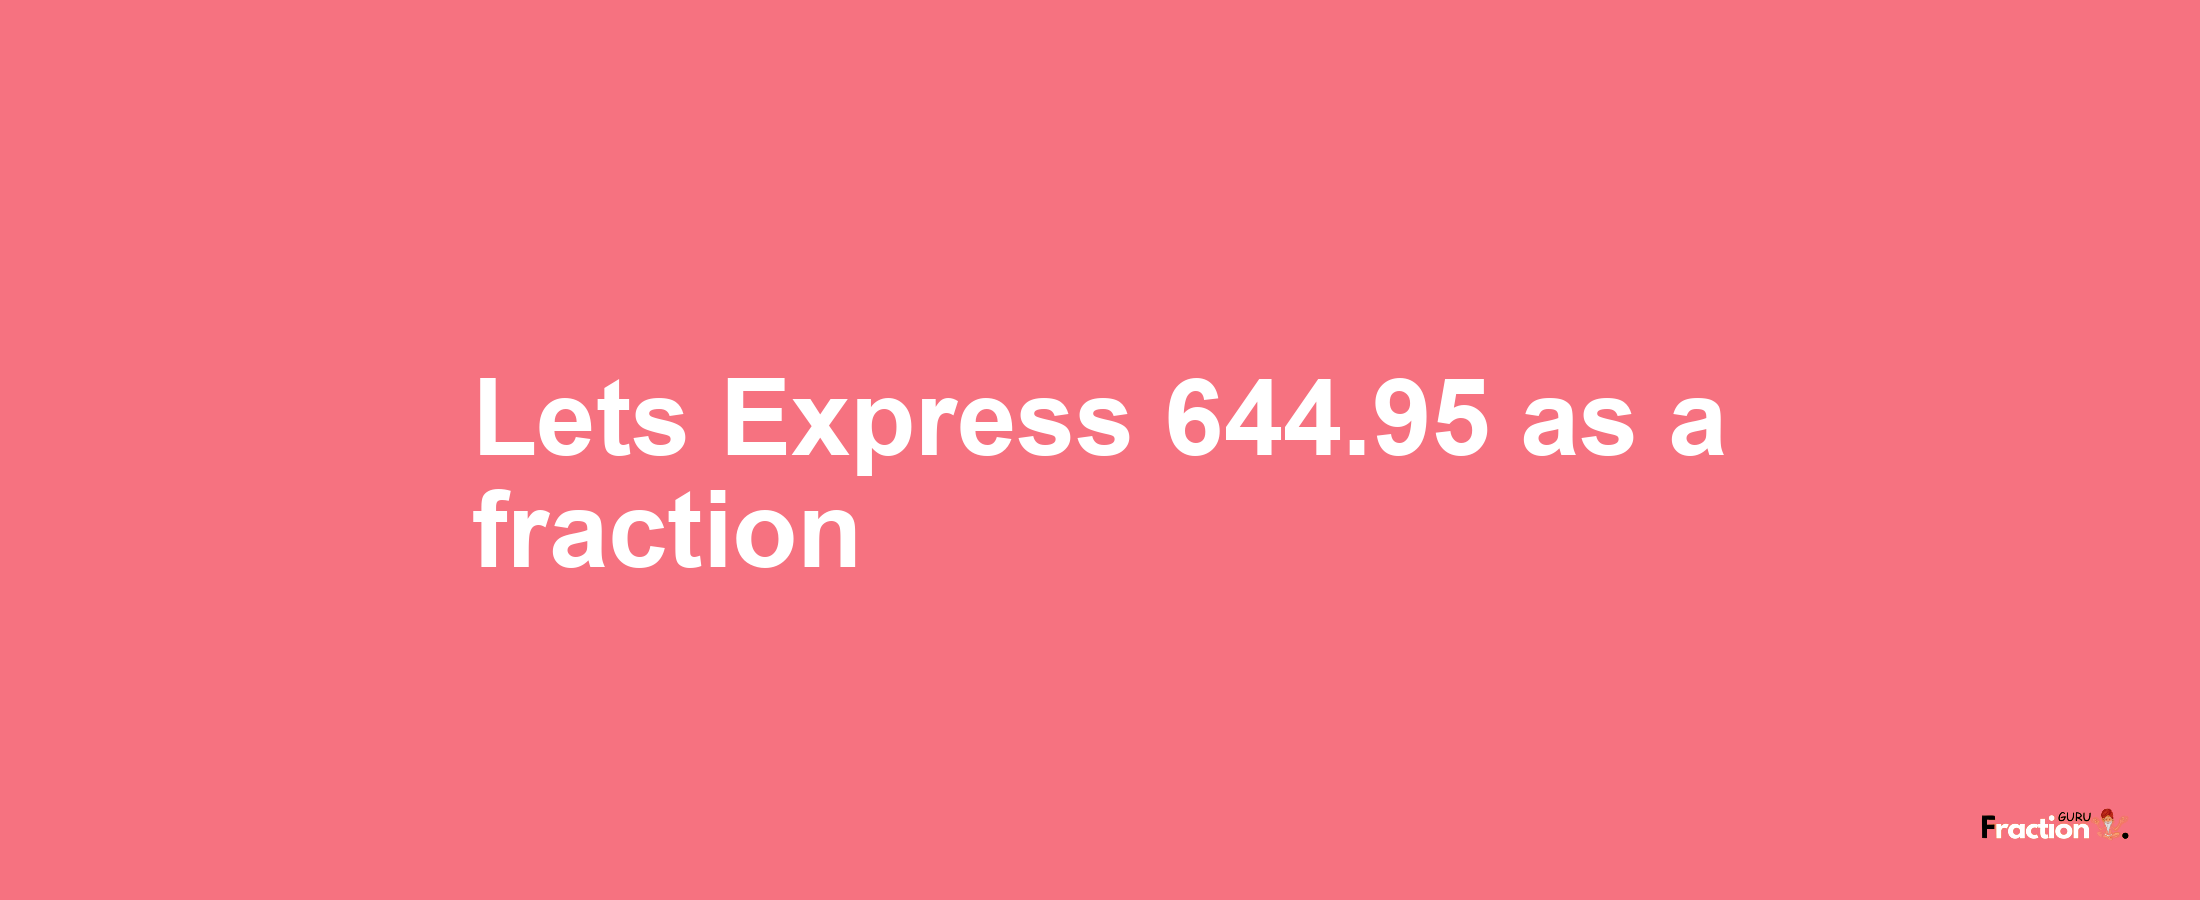 Lets Express 644.95 as afraction